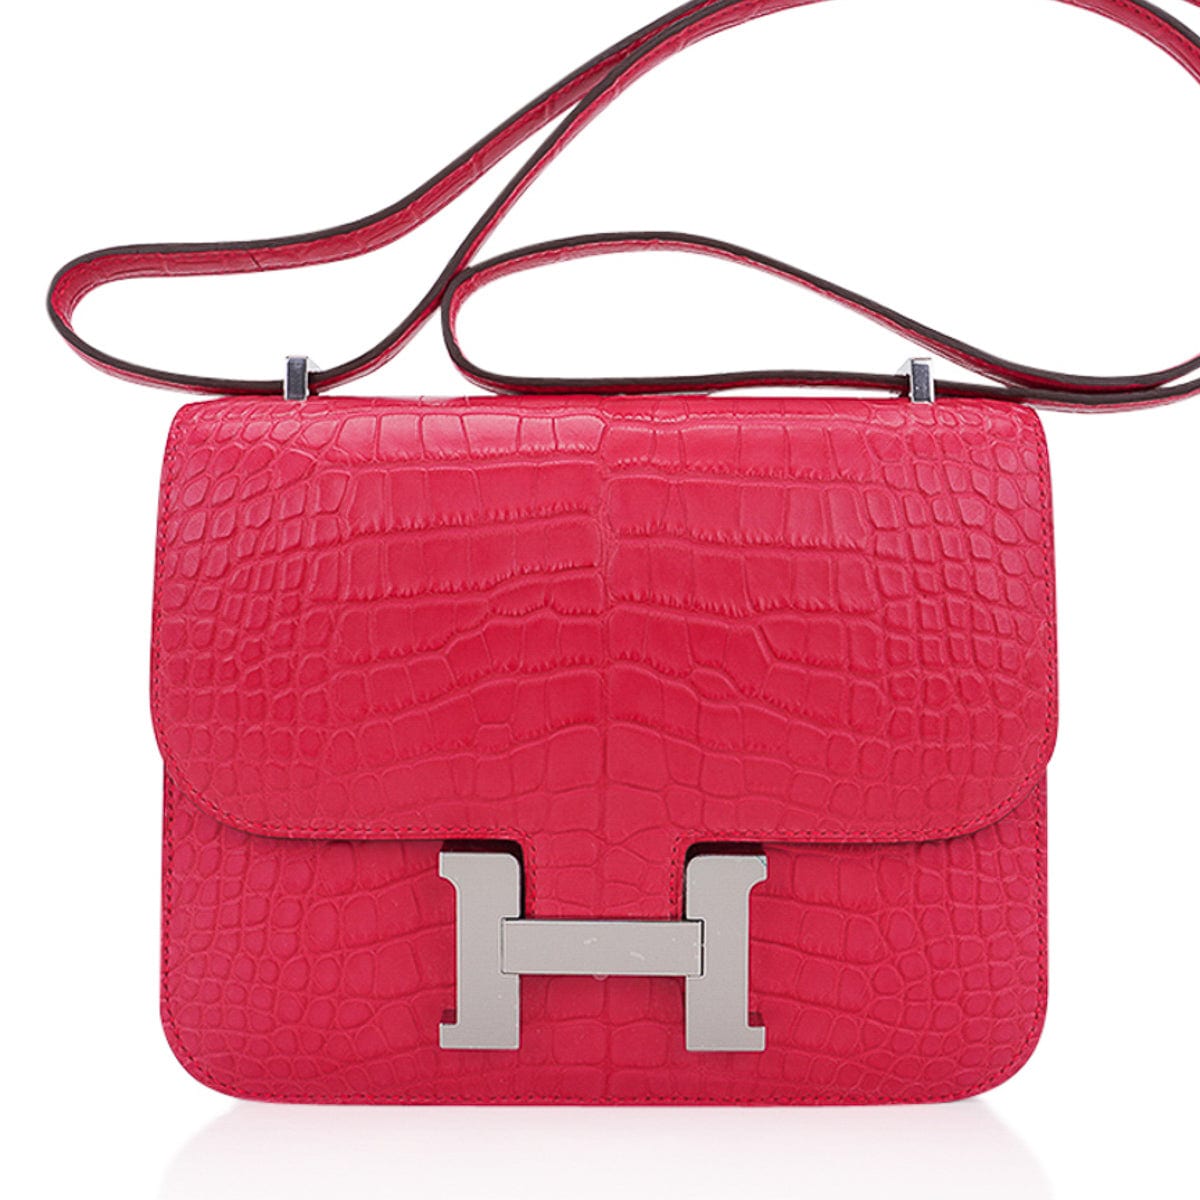 Hermès Constance 18 In Lime Swift Leather With Gold Hardware in